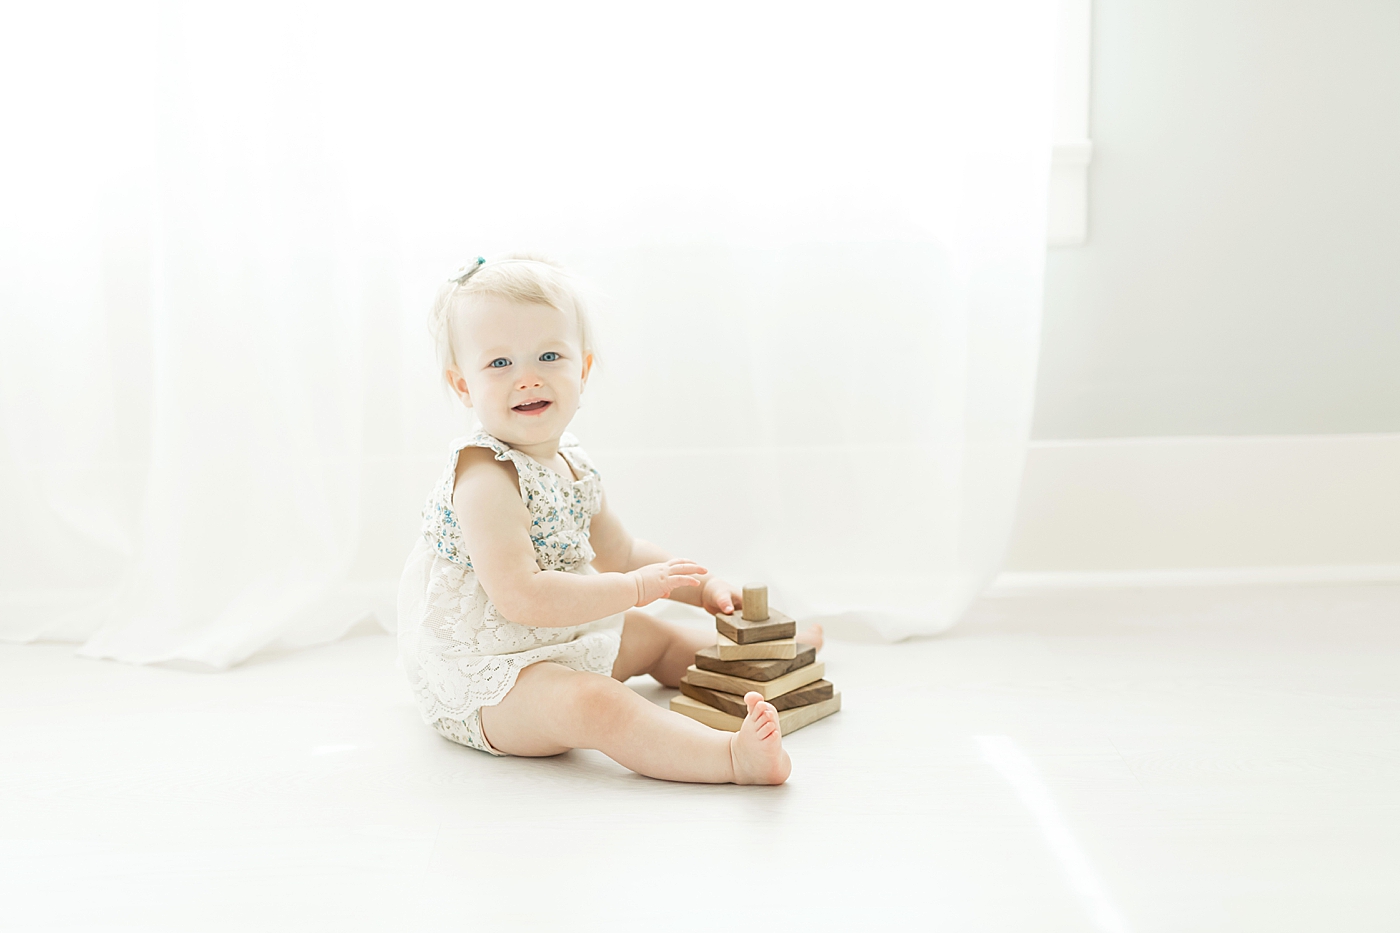 One year old playing with wooden stacker toy. Photo by Fresh Light Photography.